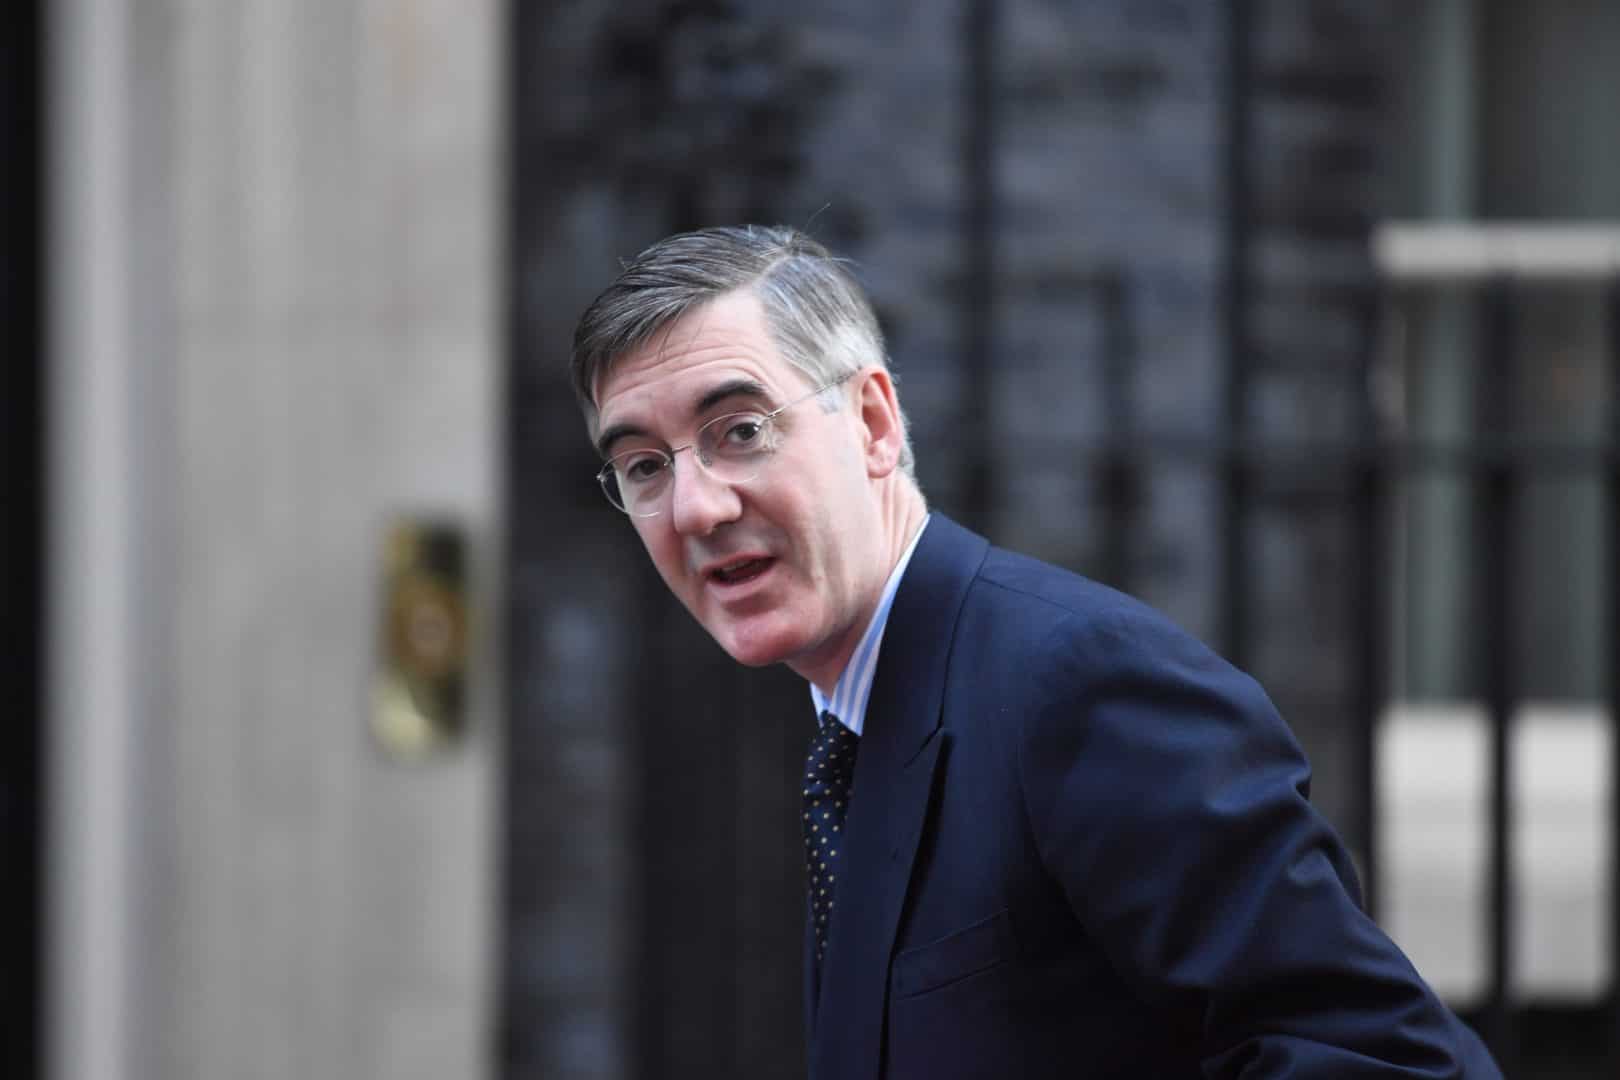 Rees-Mogg accused of making “disgraceful” comments about European Parliament